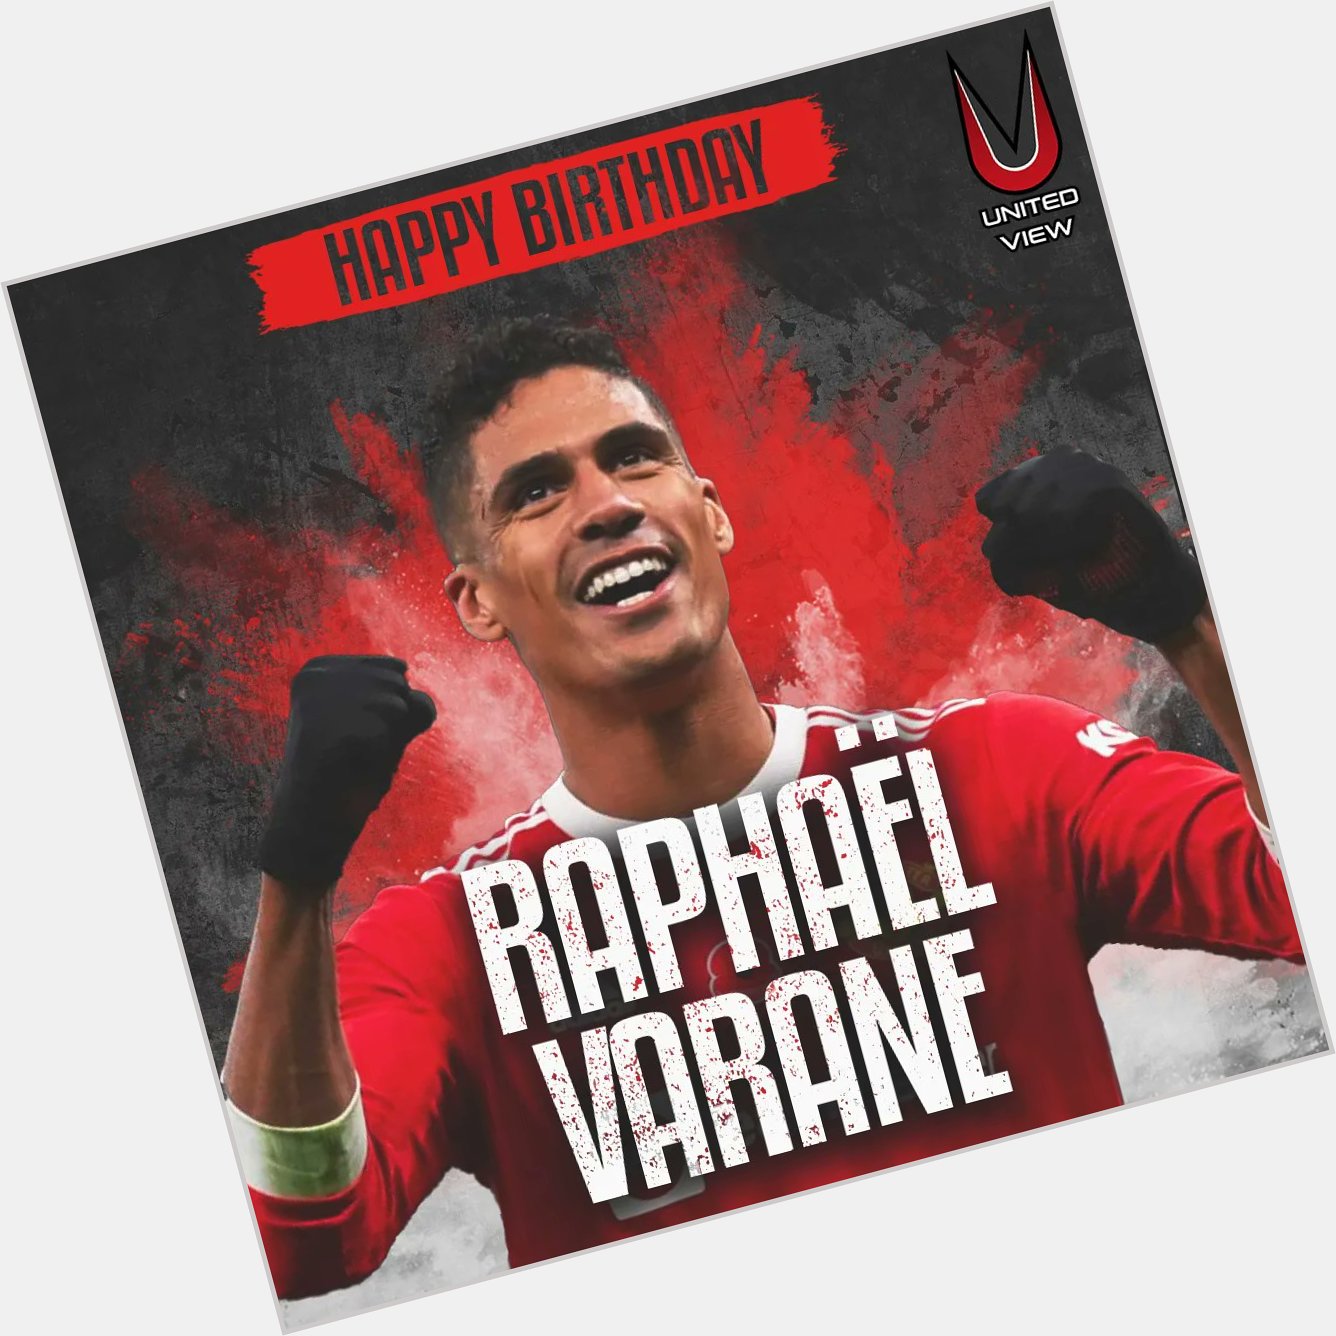 Happy Birthday to Raphael Varane!

The Manchester United centre-back turns 29 years old today   